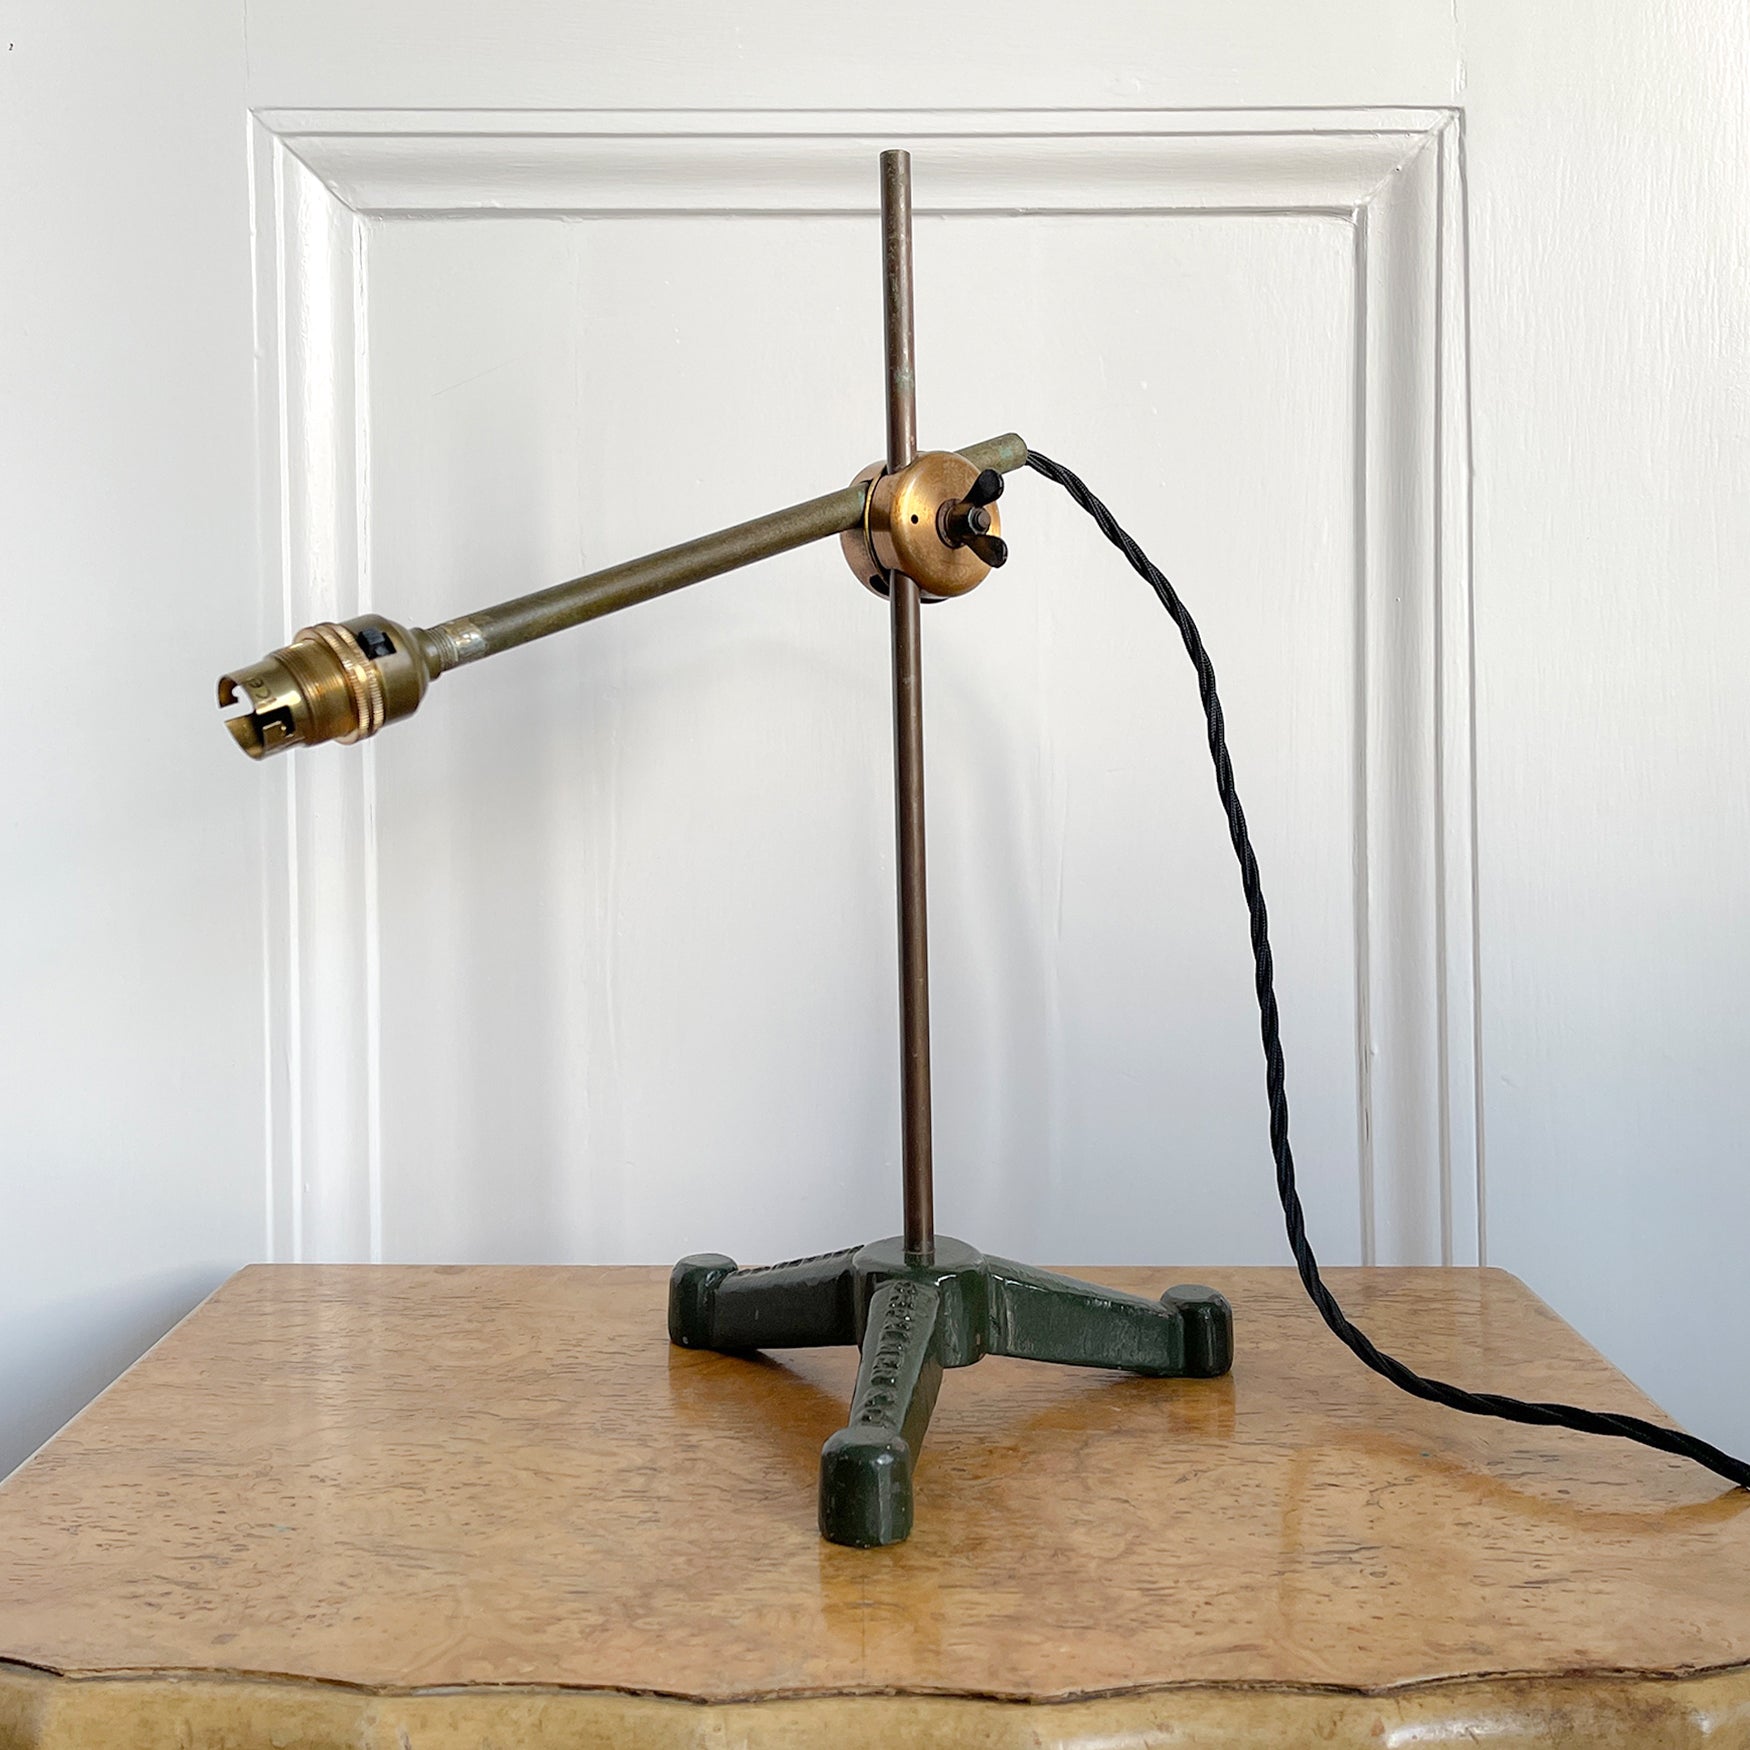 A C.F Palmer of London adjustable Lab Lamp. The heavy cast base is marked 'C.F. PALMER & Co' & 'LONDON .S.W.' It has brass upright and cross poles, with brass adjustment block with a black wing nut. - SHOP NOW - www.intovintage.co.uk